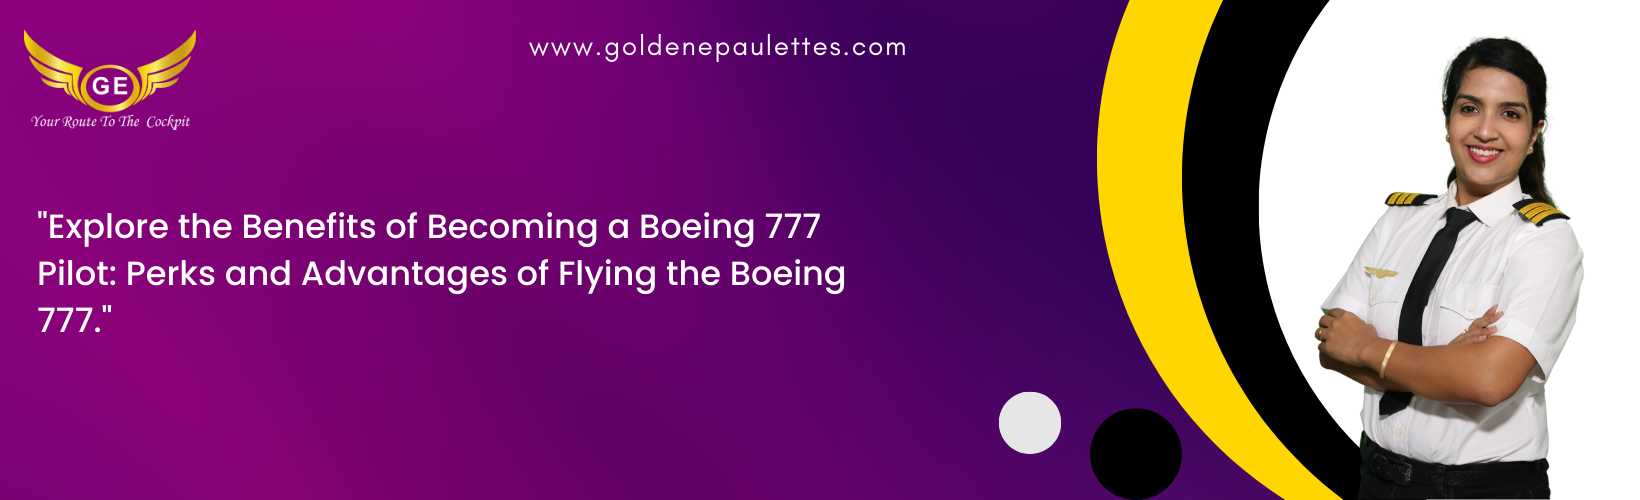 The Benefits of Becoming a Boeing 777 Pilot